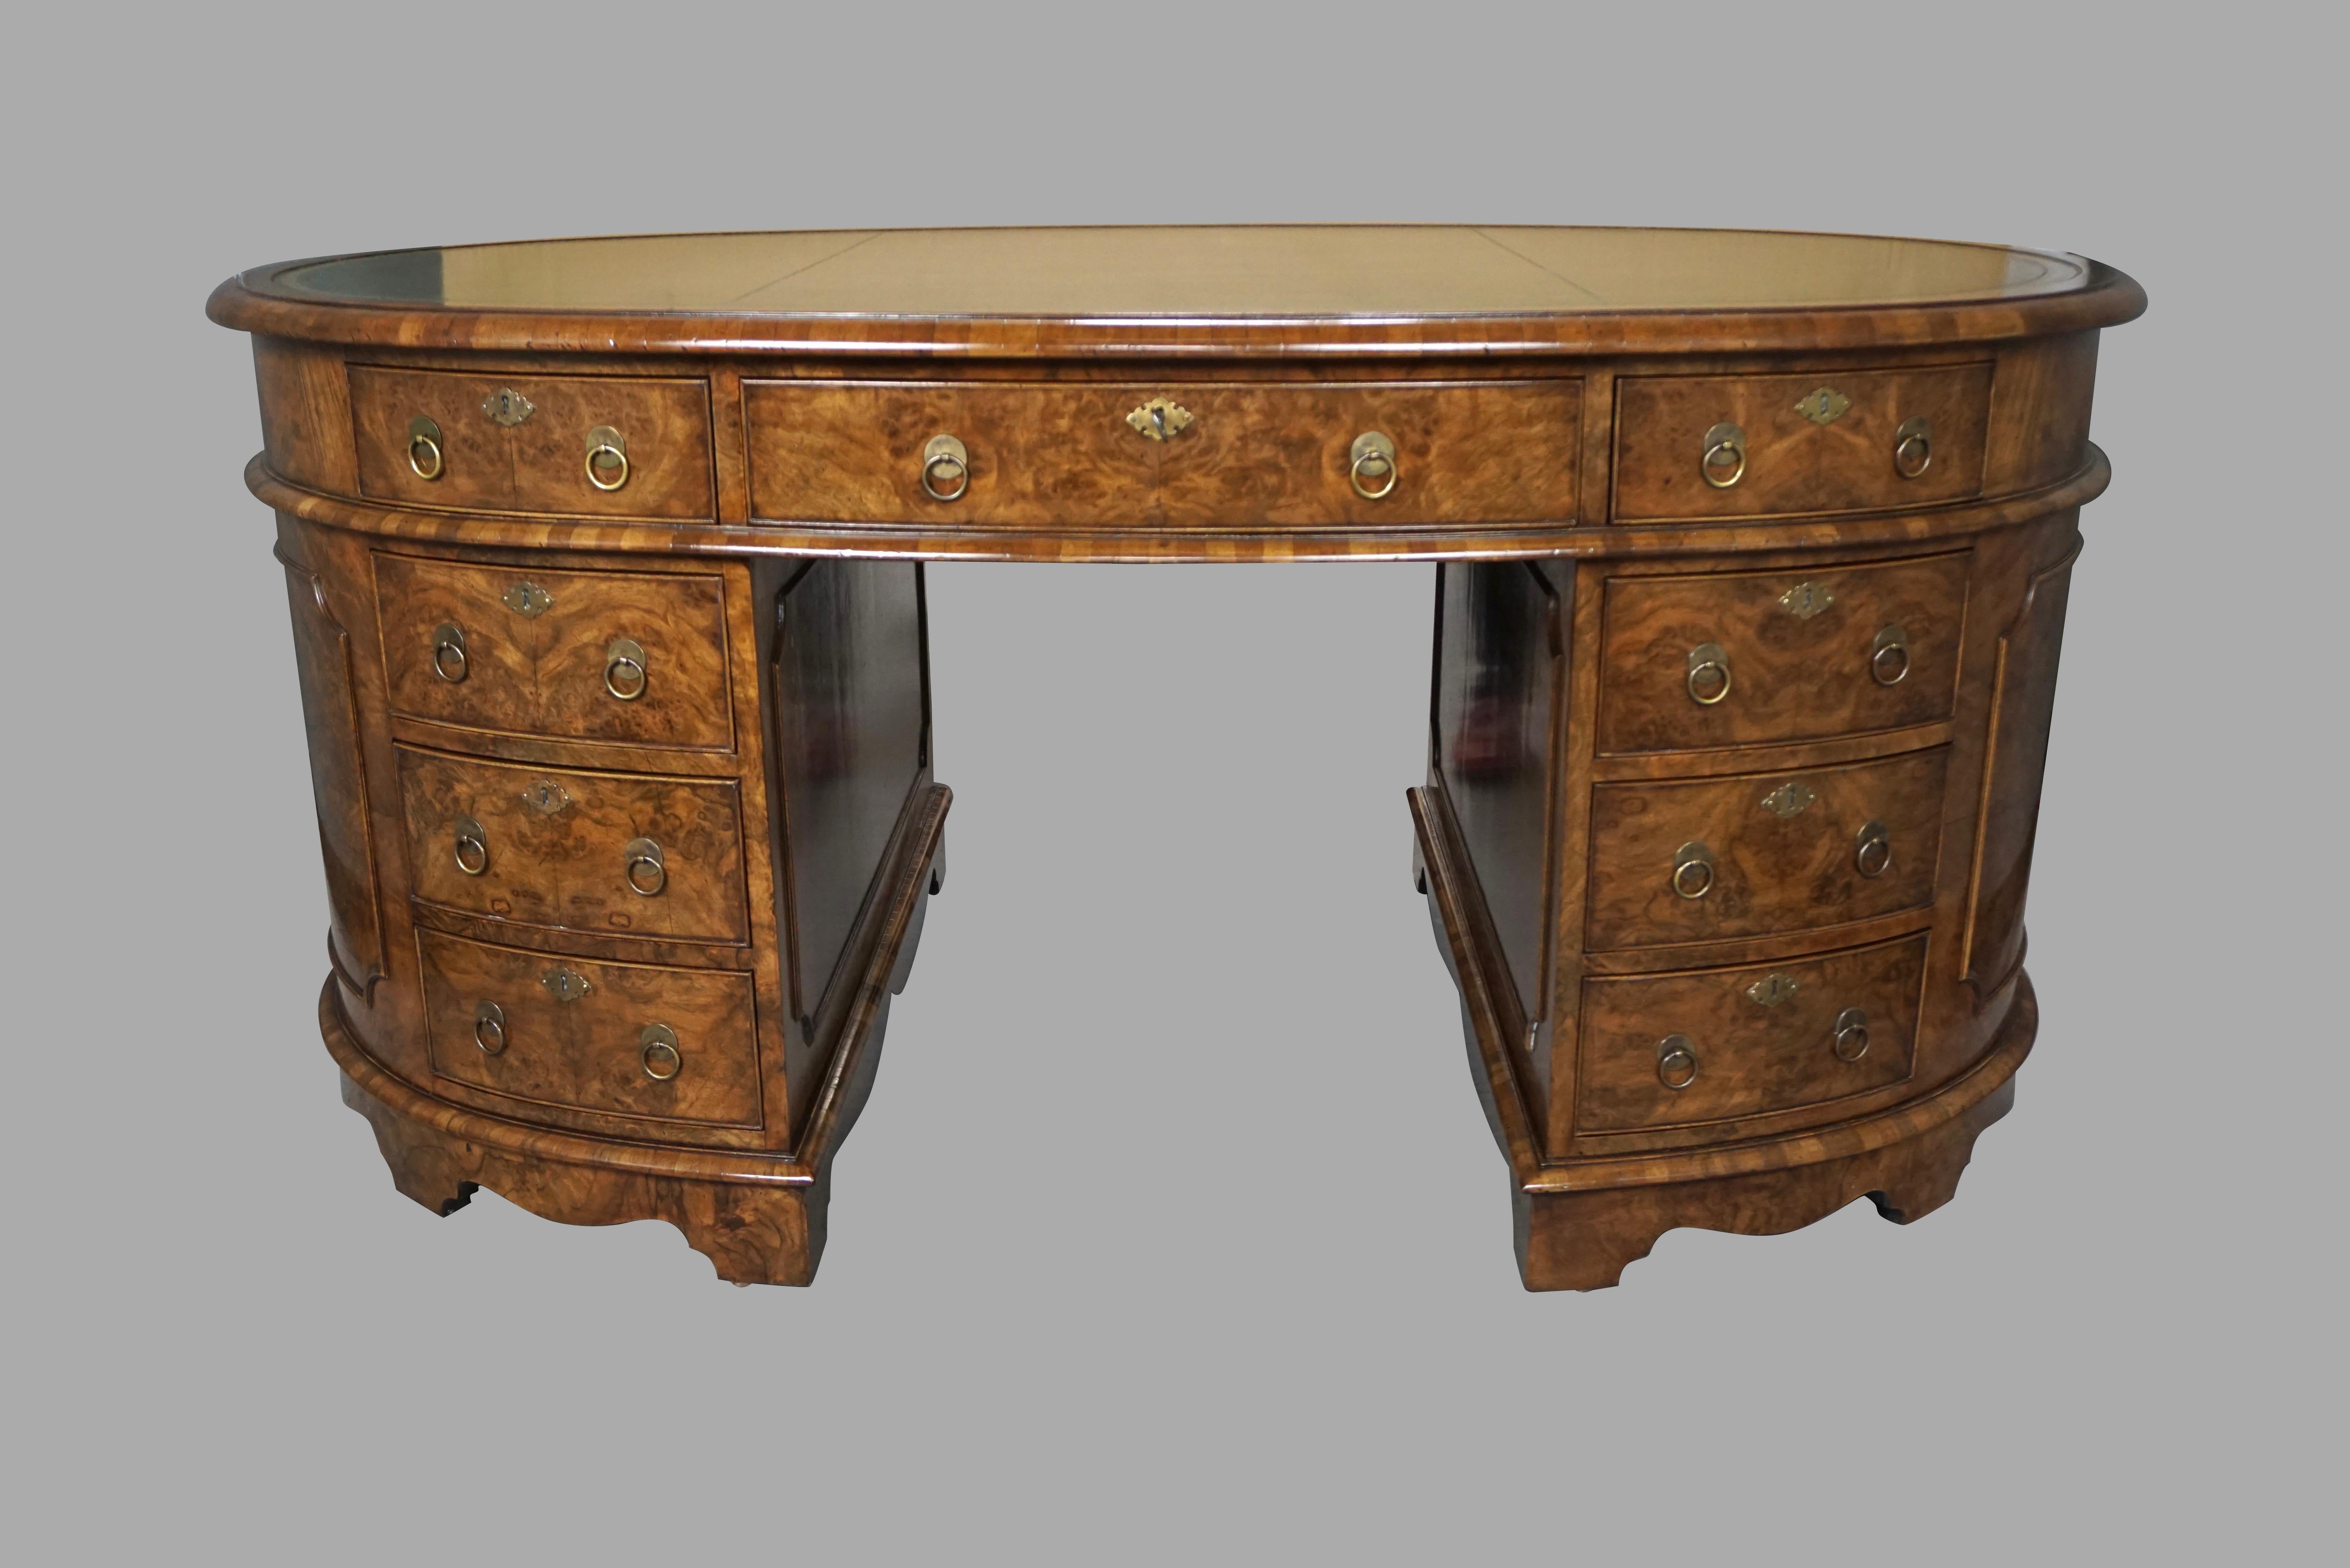 19th Century Fine Georgian Style Burl Walnut Oval Partners Desk with Tooled Leather Top